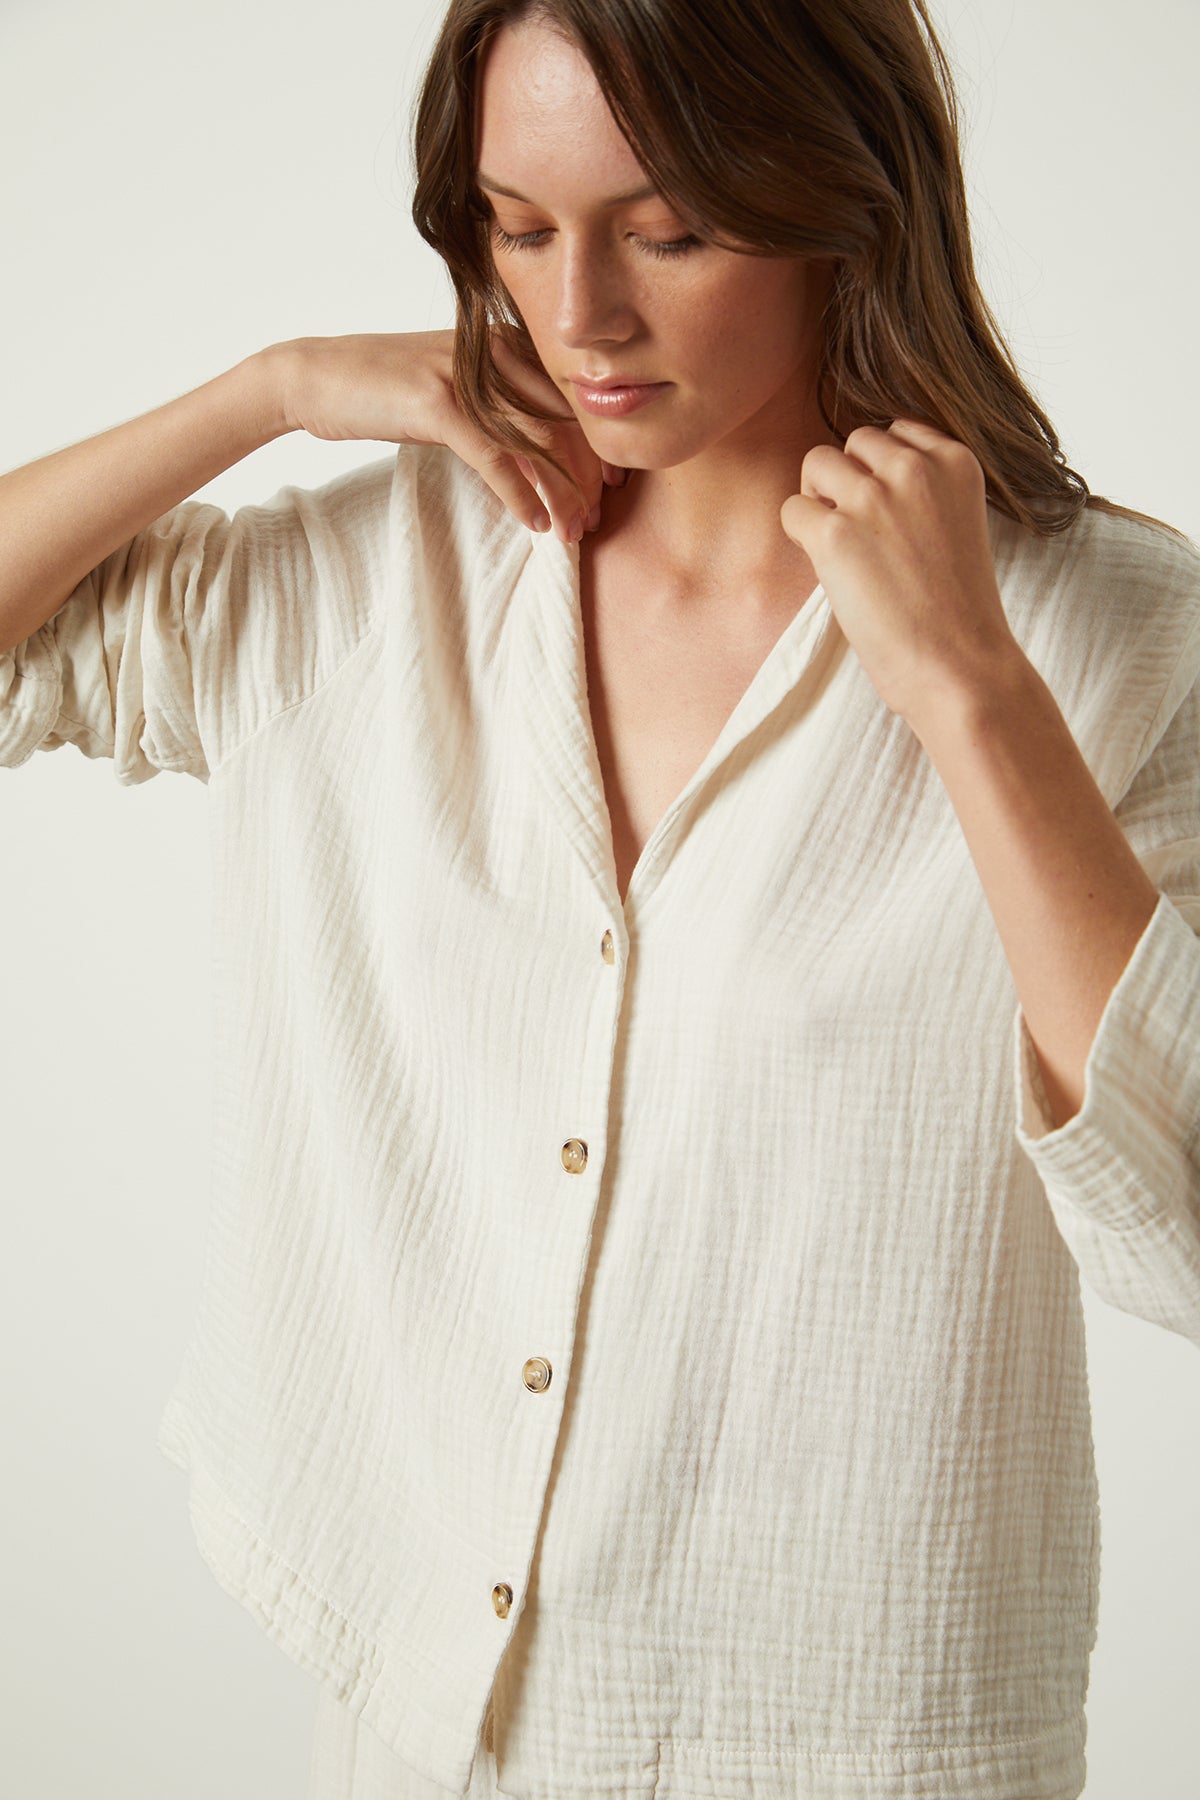   The model is wearing a Jenny Graham Home white button down shirt. 